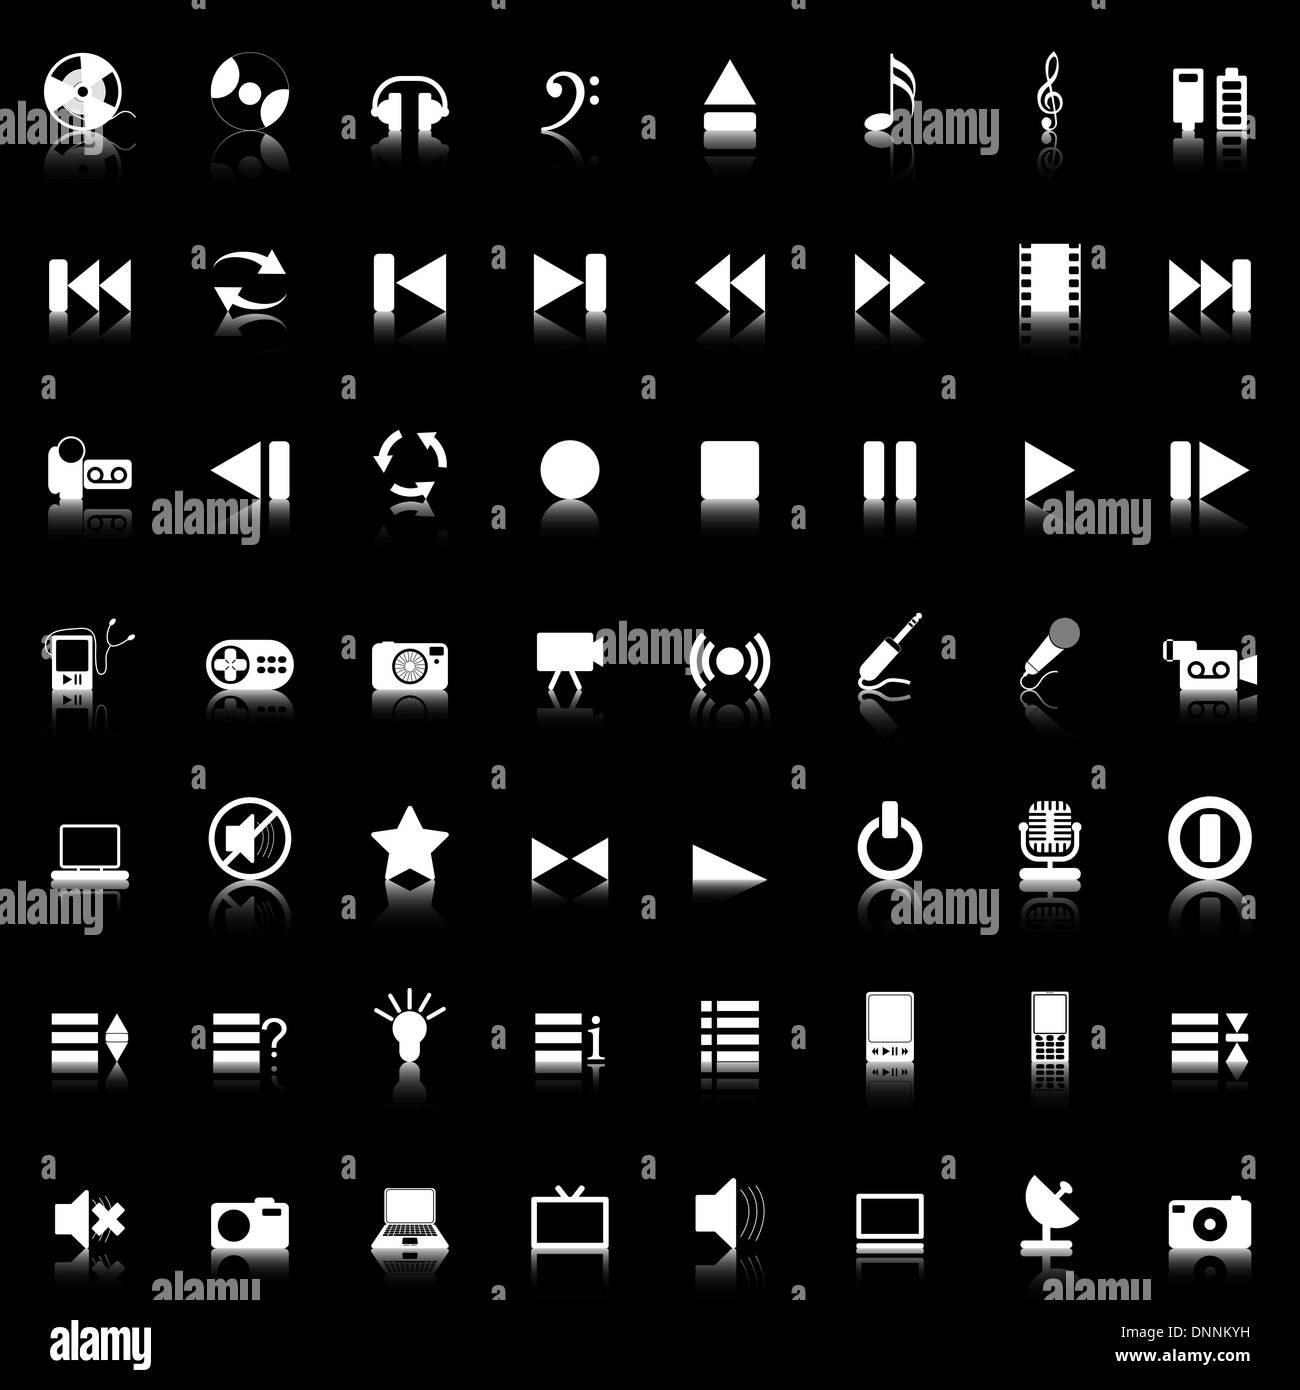 Vector collection of different music themes icons Stock Vector